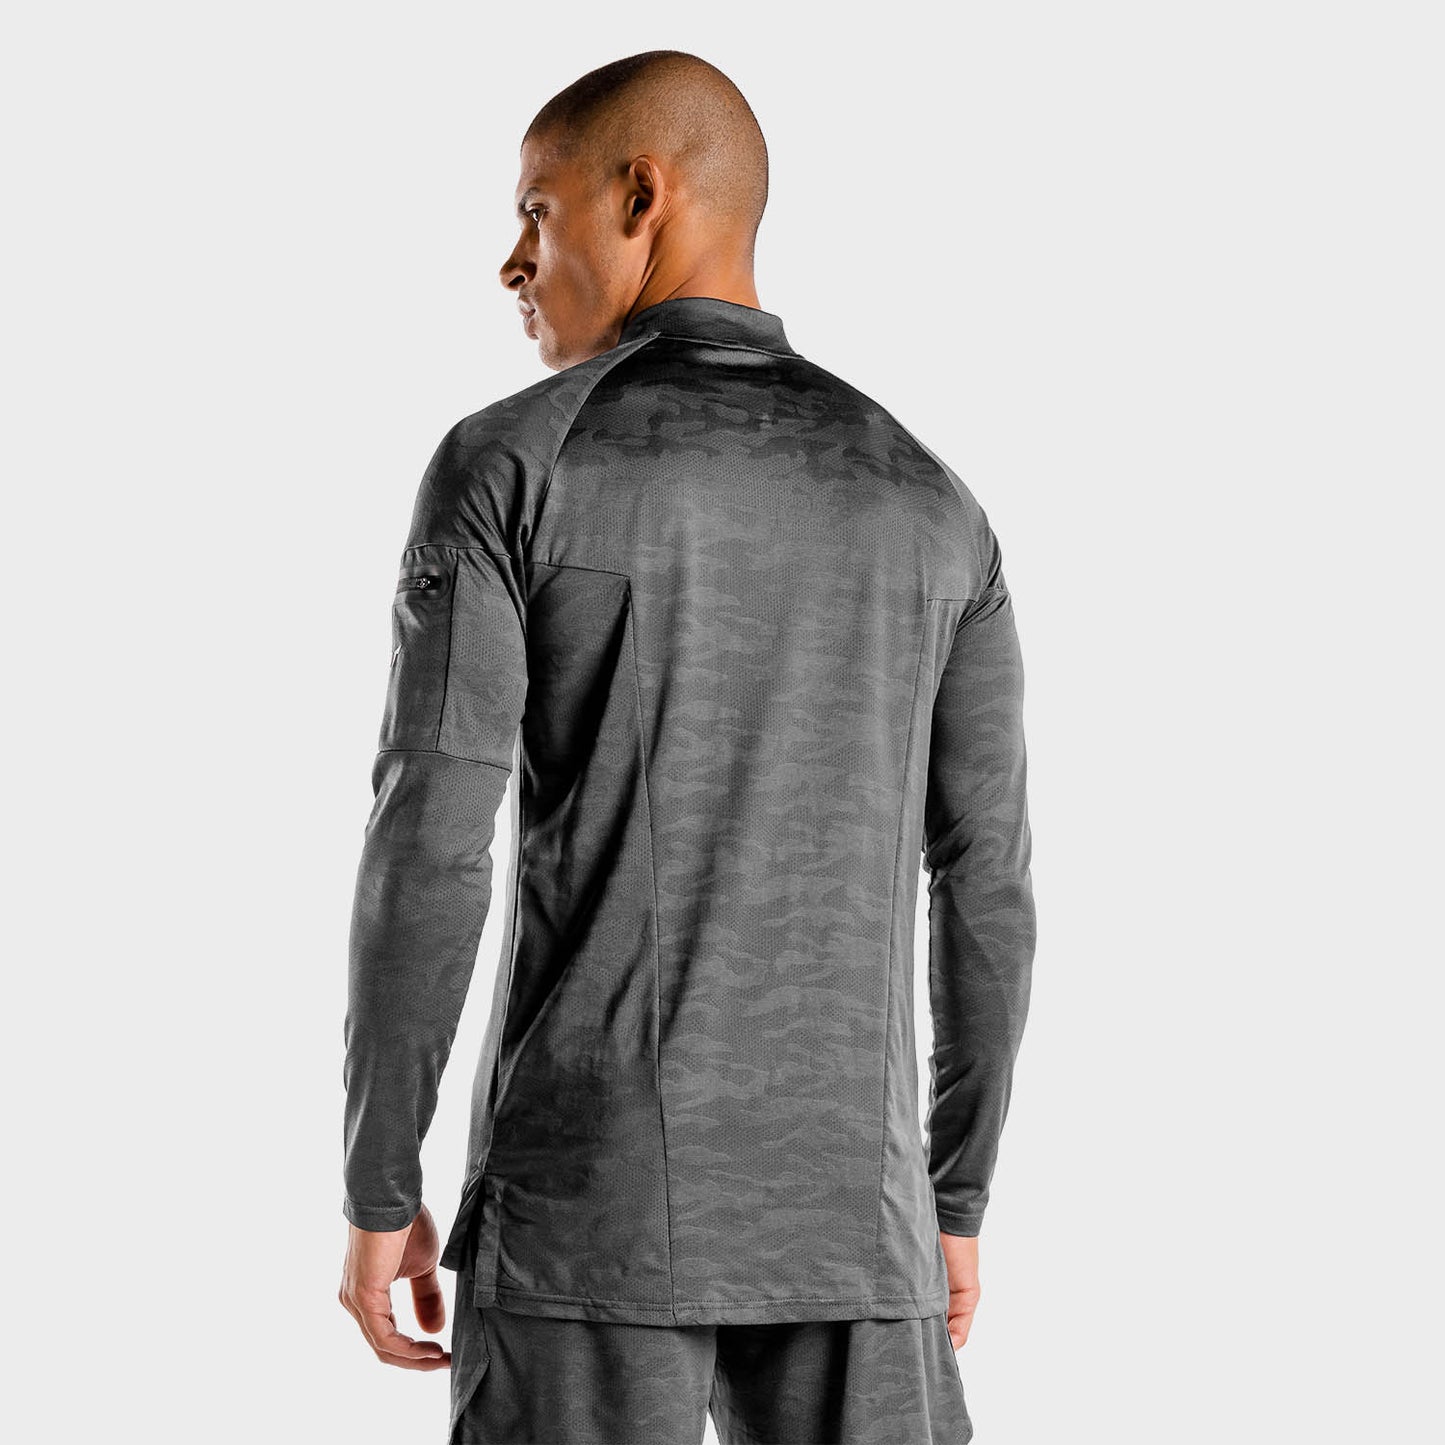 squatwolf-running-wolf-tops-for-men-gym-running-top-charcoal-long-sleeve